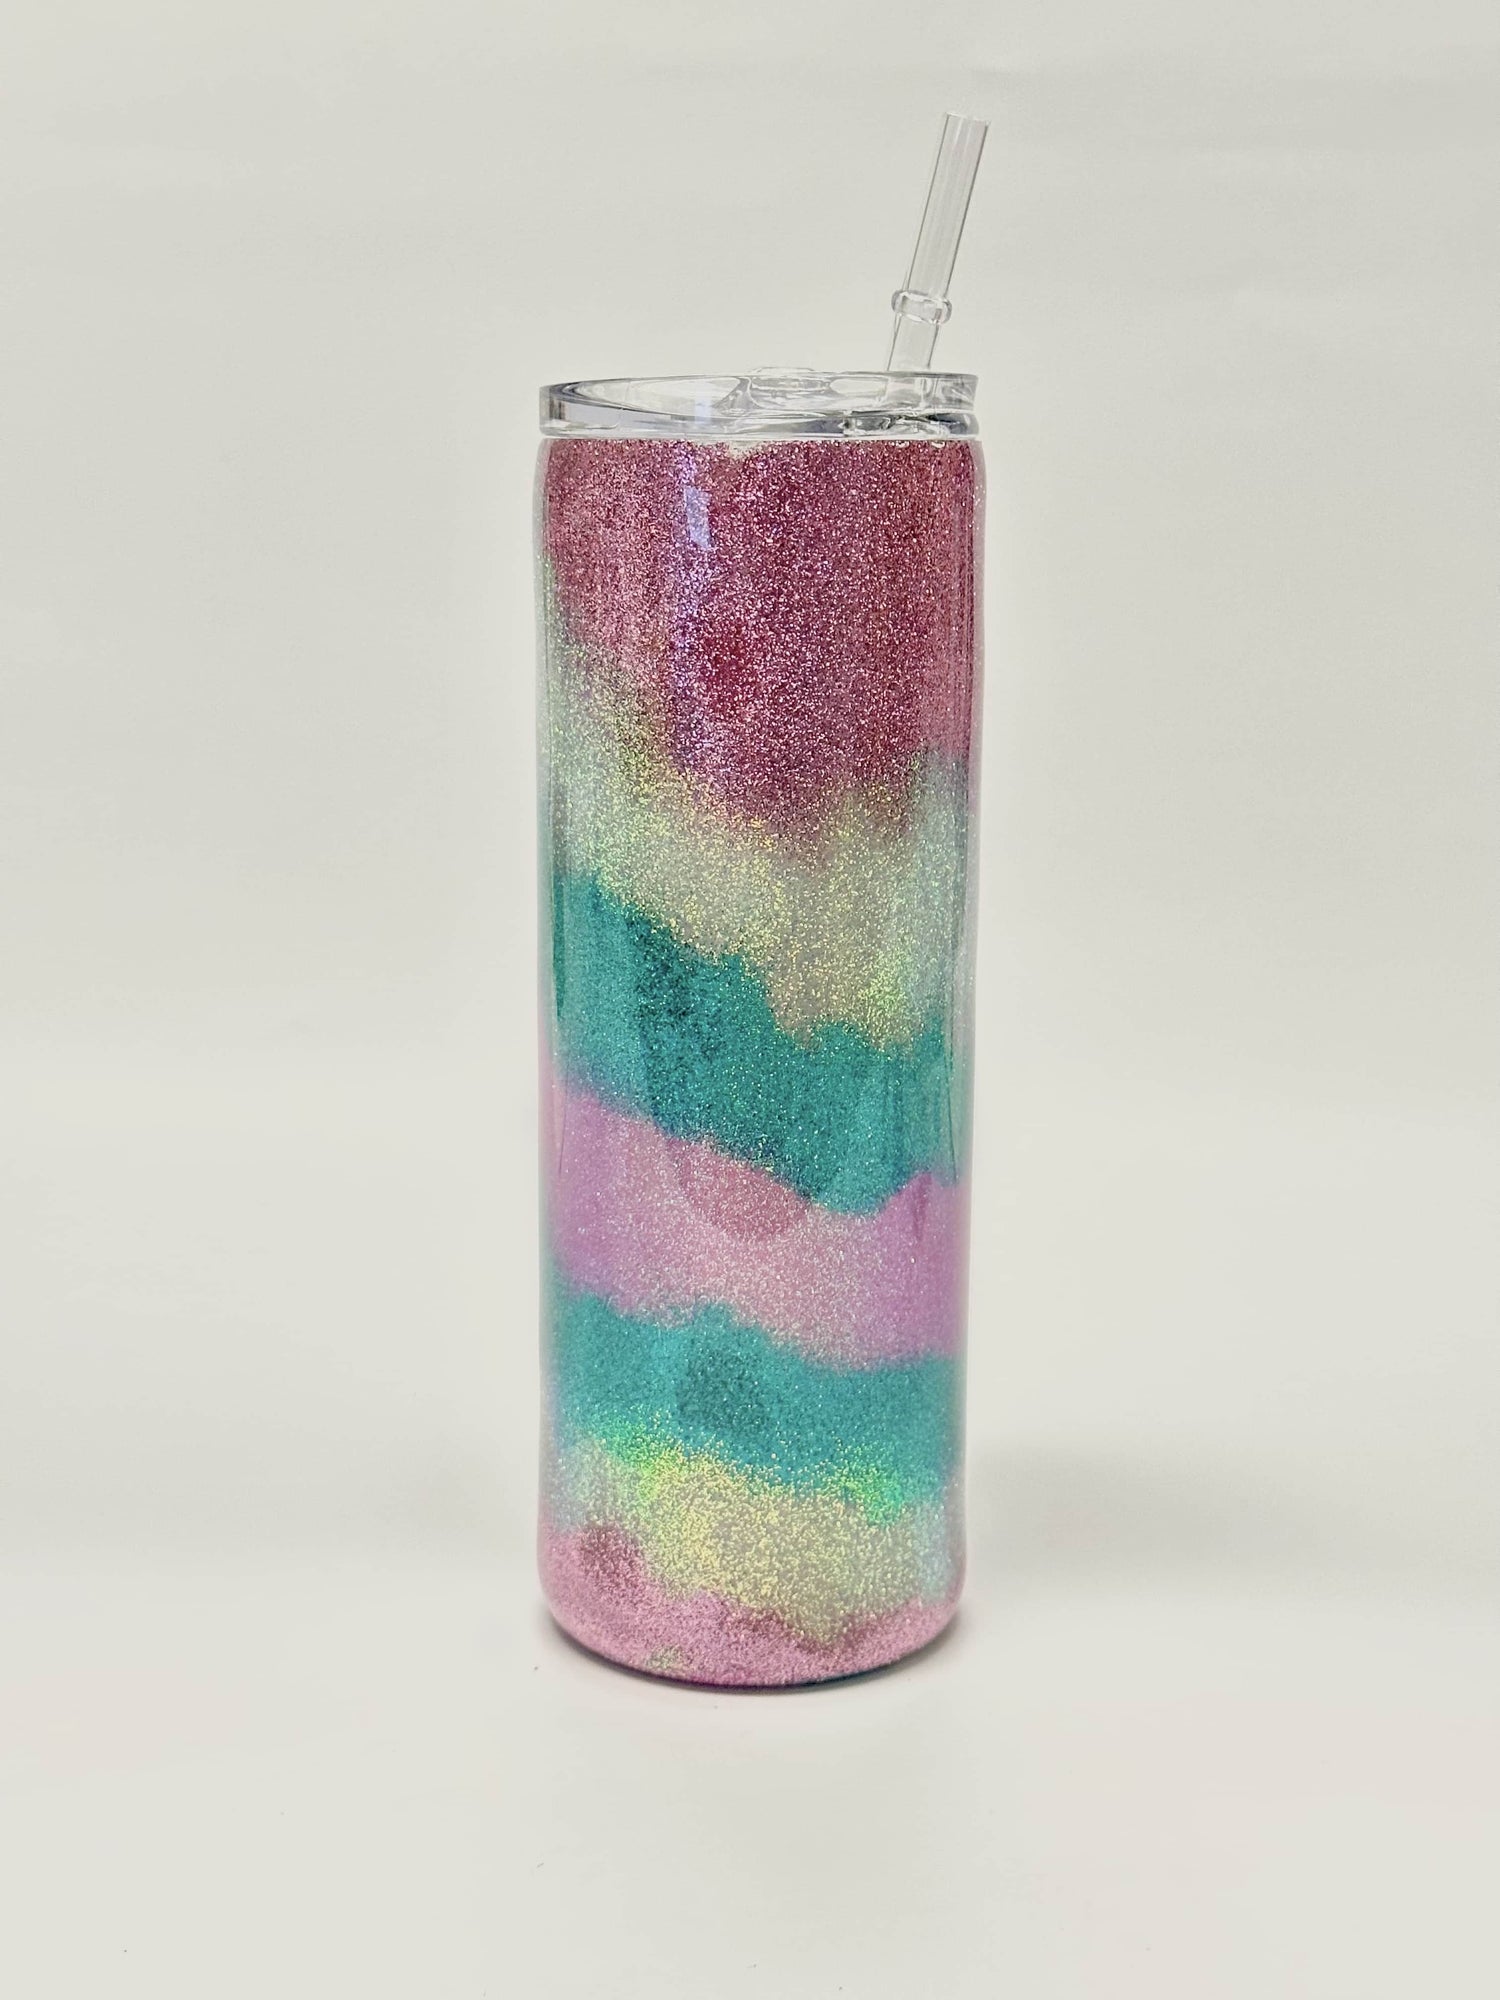 How to make epoxy tumblers: A step-by-step guide